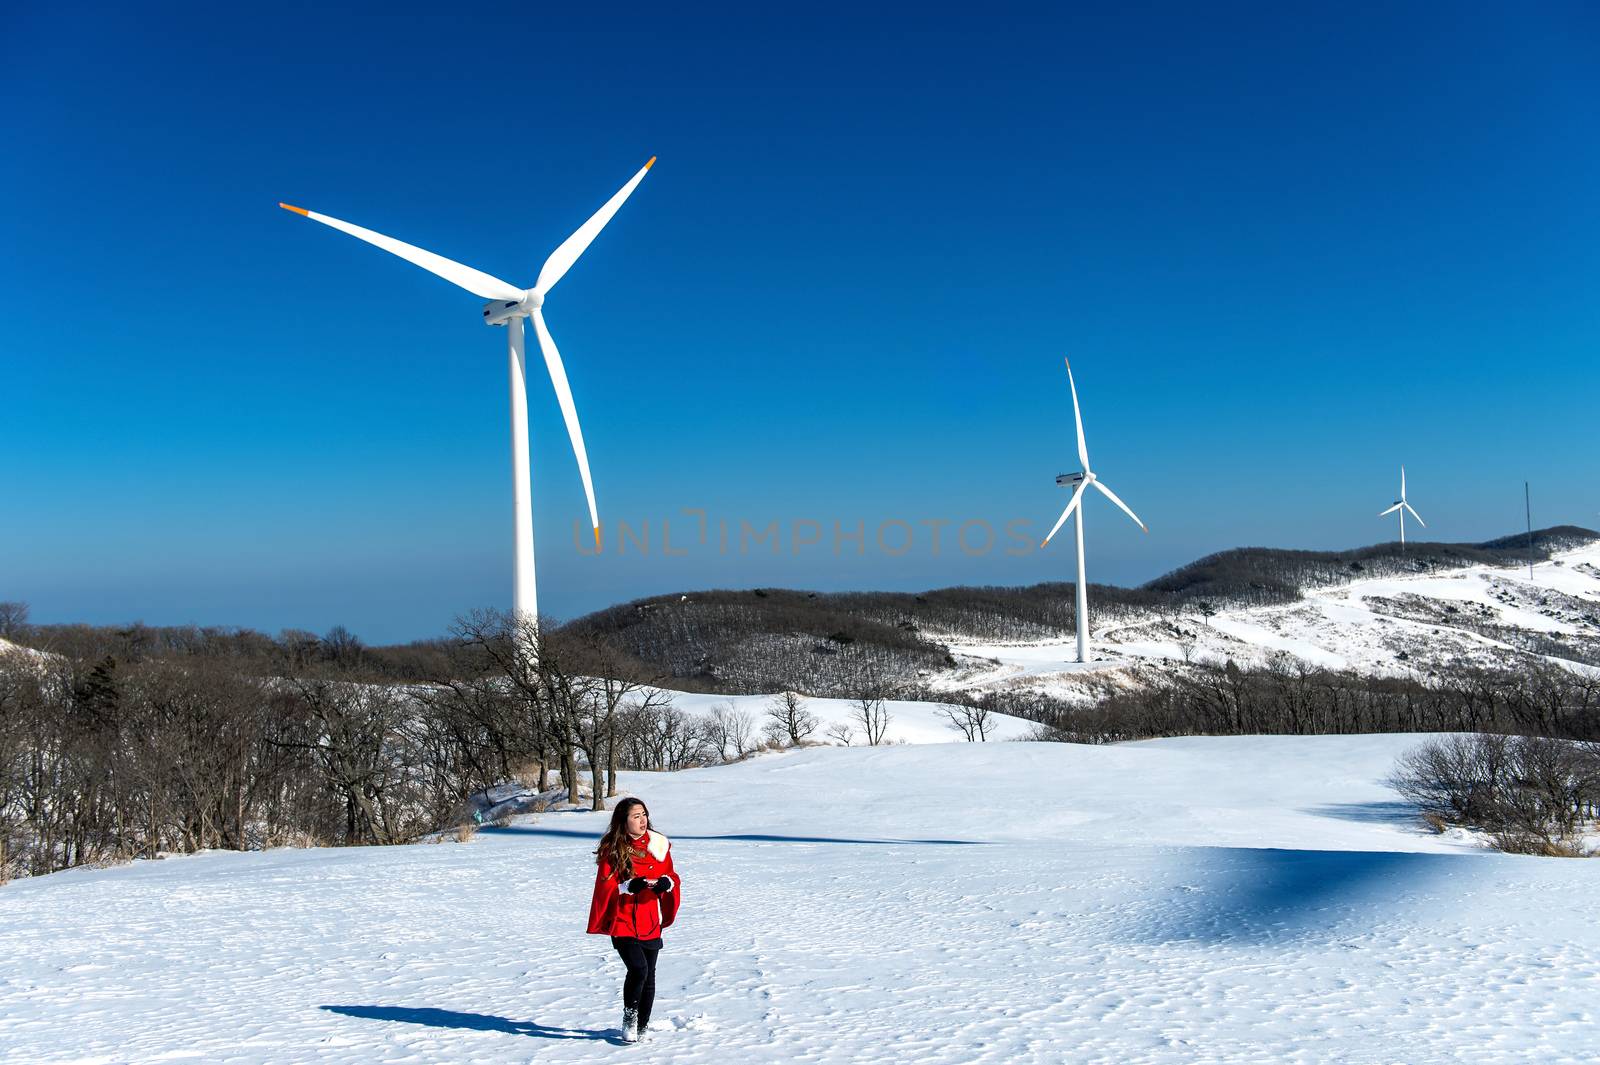 Beautiful girl walking in winter landscape of sky and winter road with snow and red dress and wind turbine.